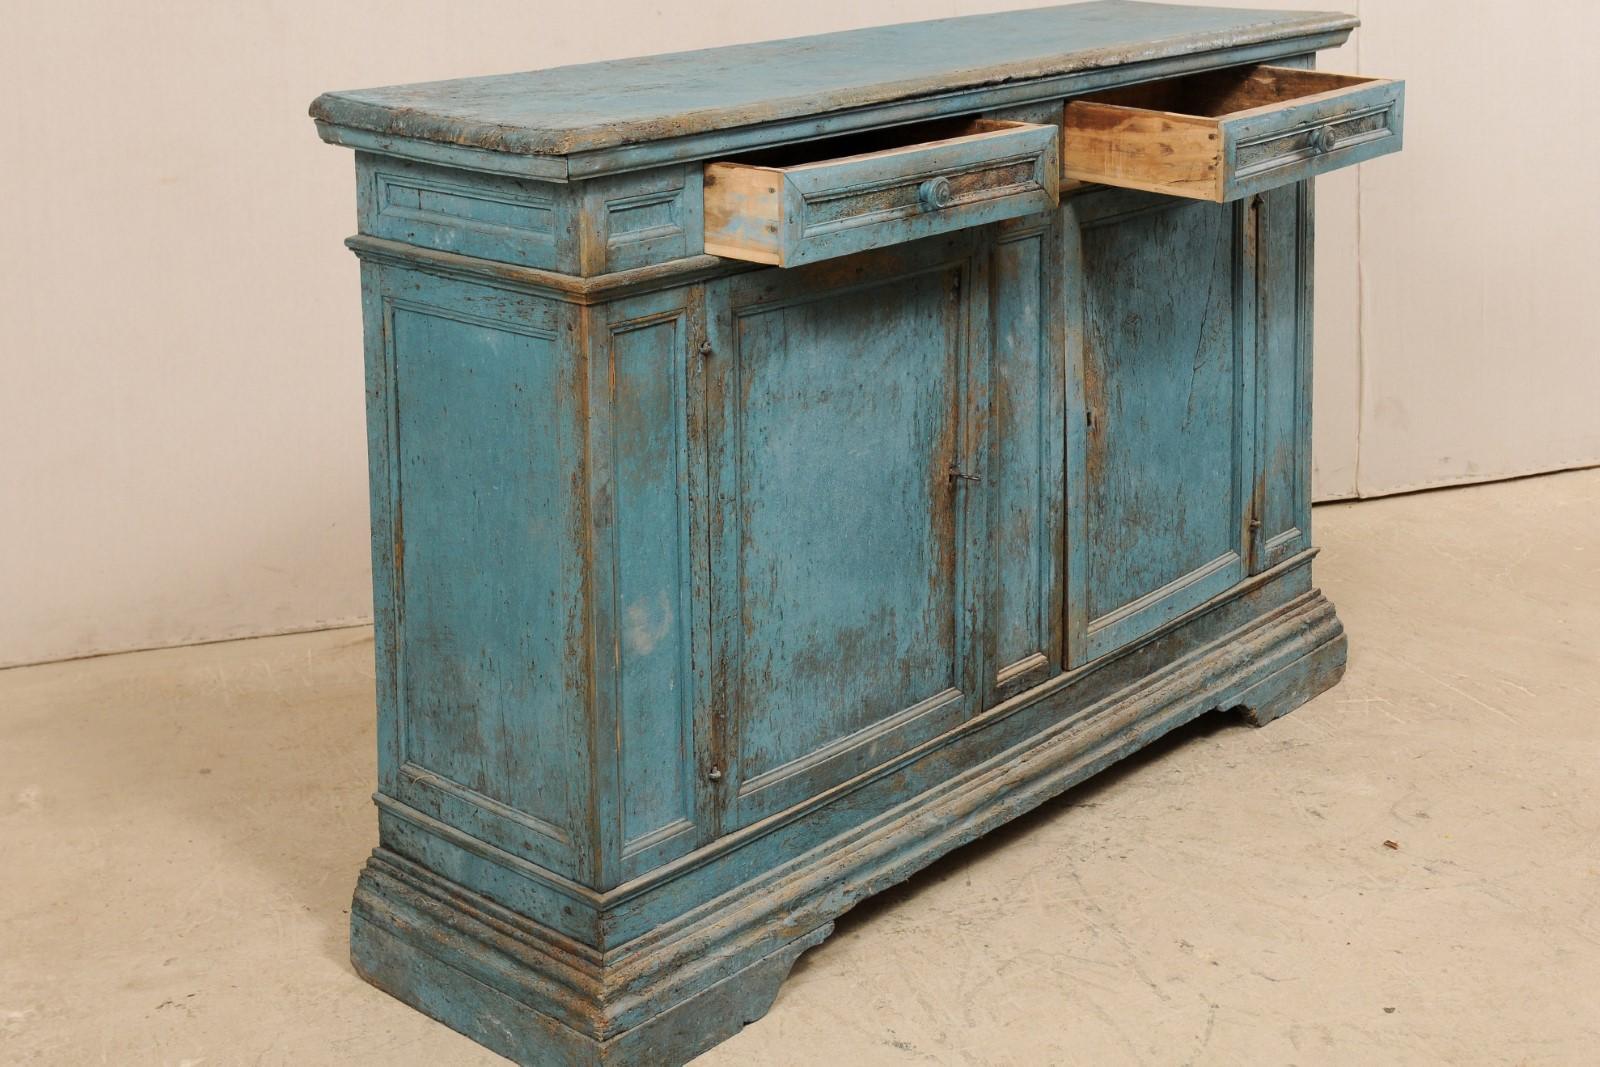 Wood A 19th Century Italian Console Storage Cabinet, in Beautiful Blue Color